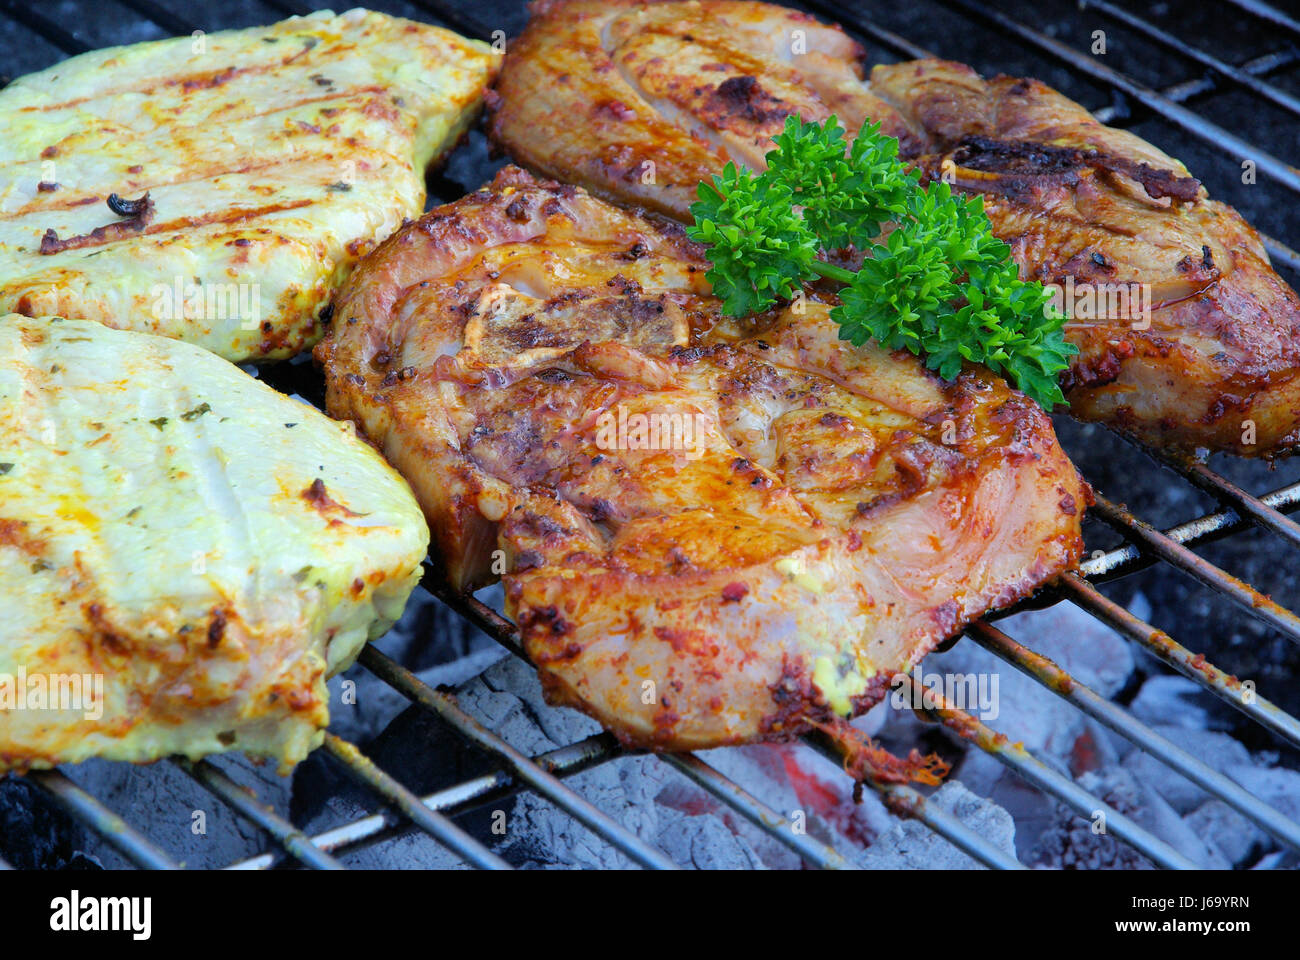 rust grill barbecue barbeque steak pig meat spice green boil cooks boiling Stock Photo